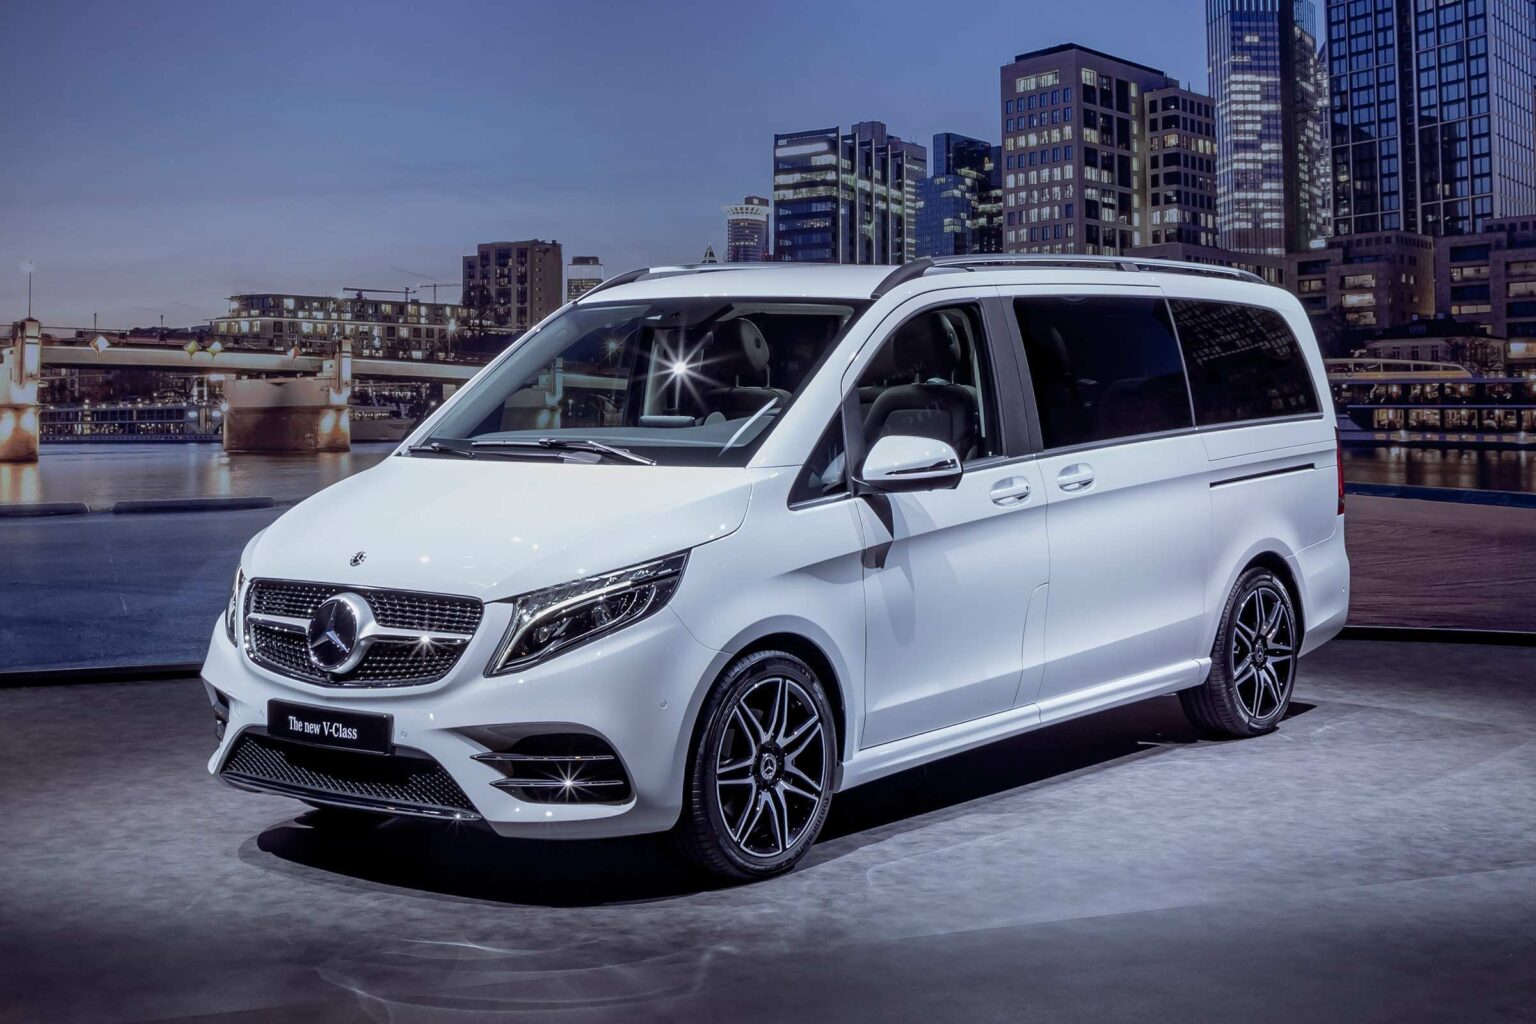 Exploring Kelty and Fife in Luxury: Why the Mercedes V-Class is Your Perfect Travel Companion